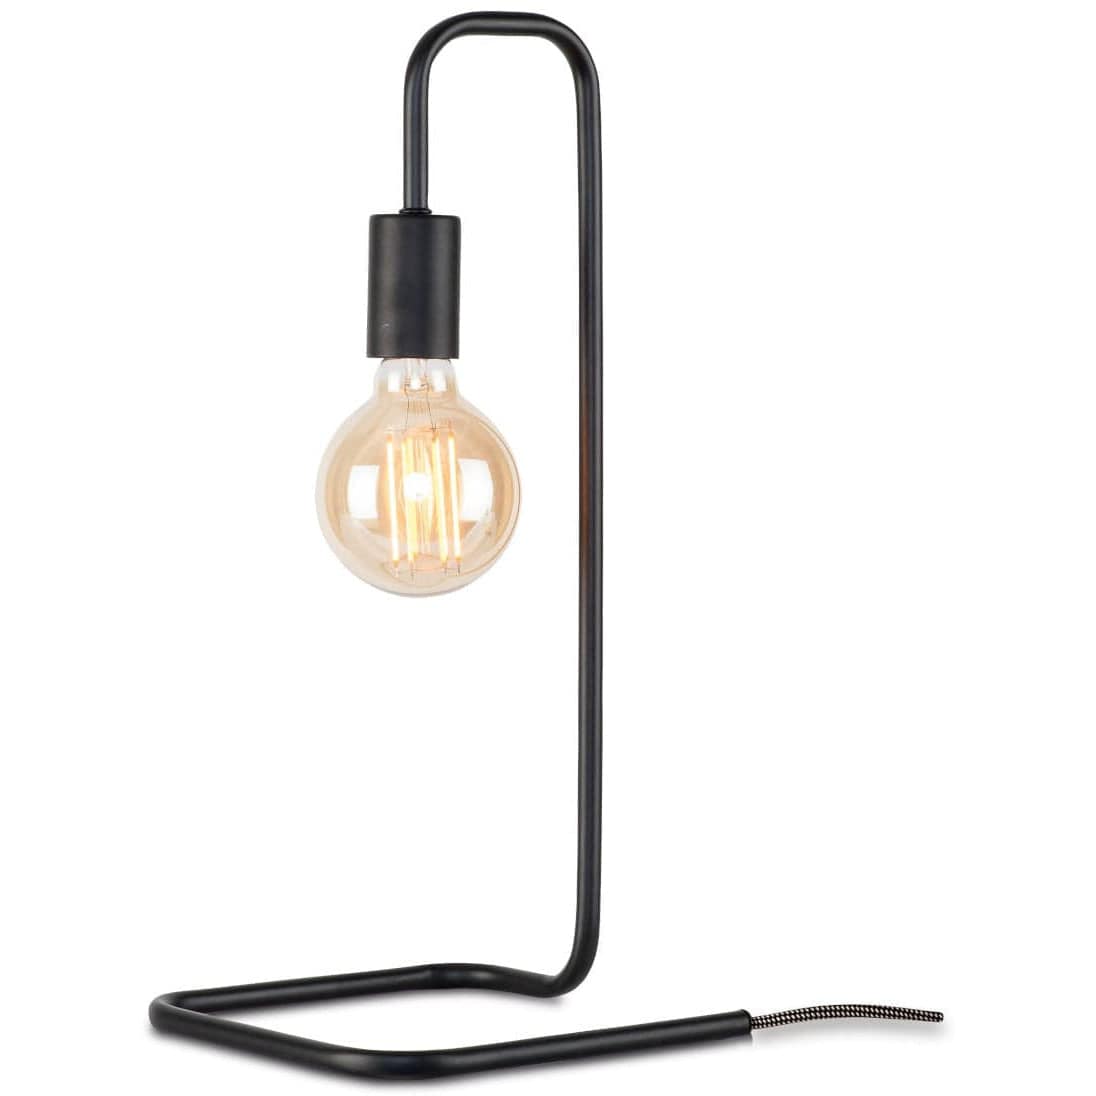 It's About RoMi Table Lamp London Table Lamp, Black or White